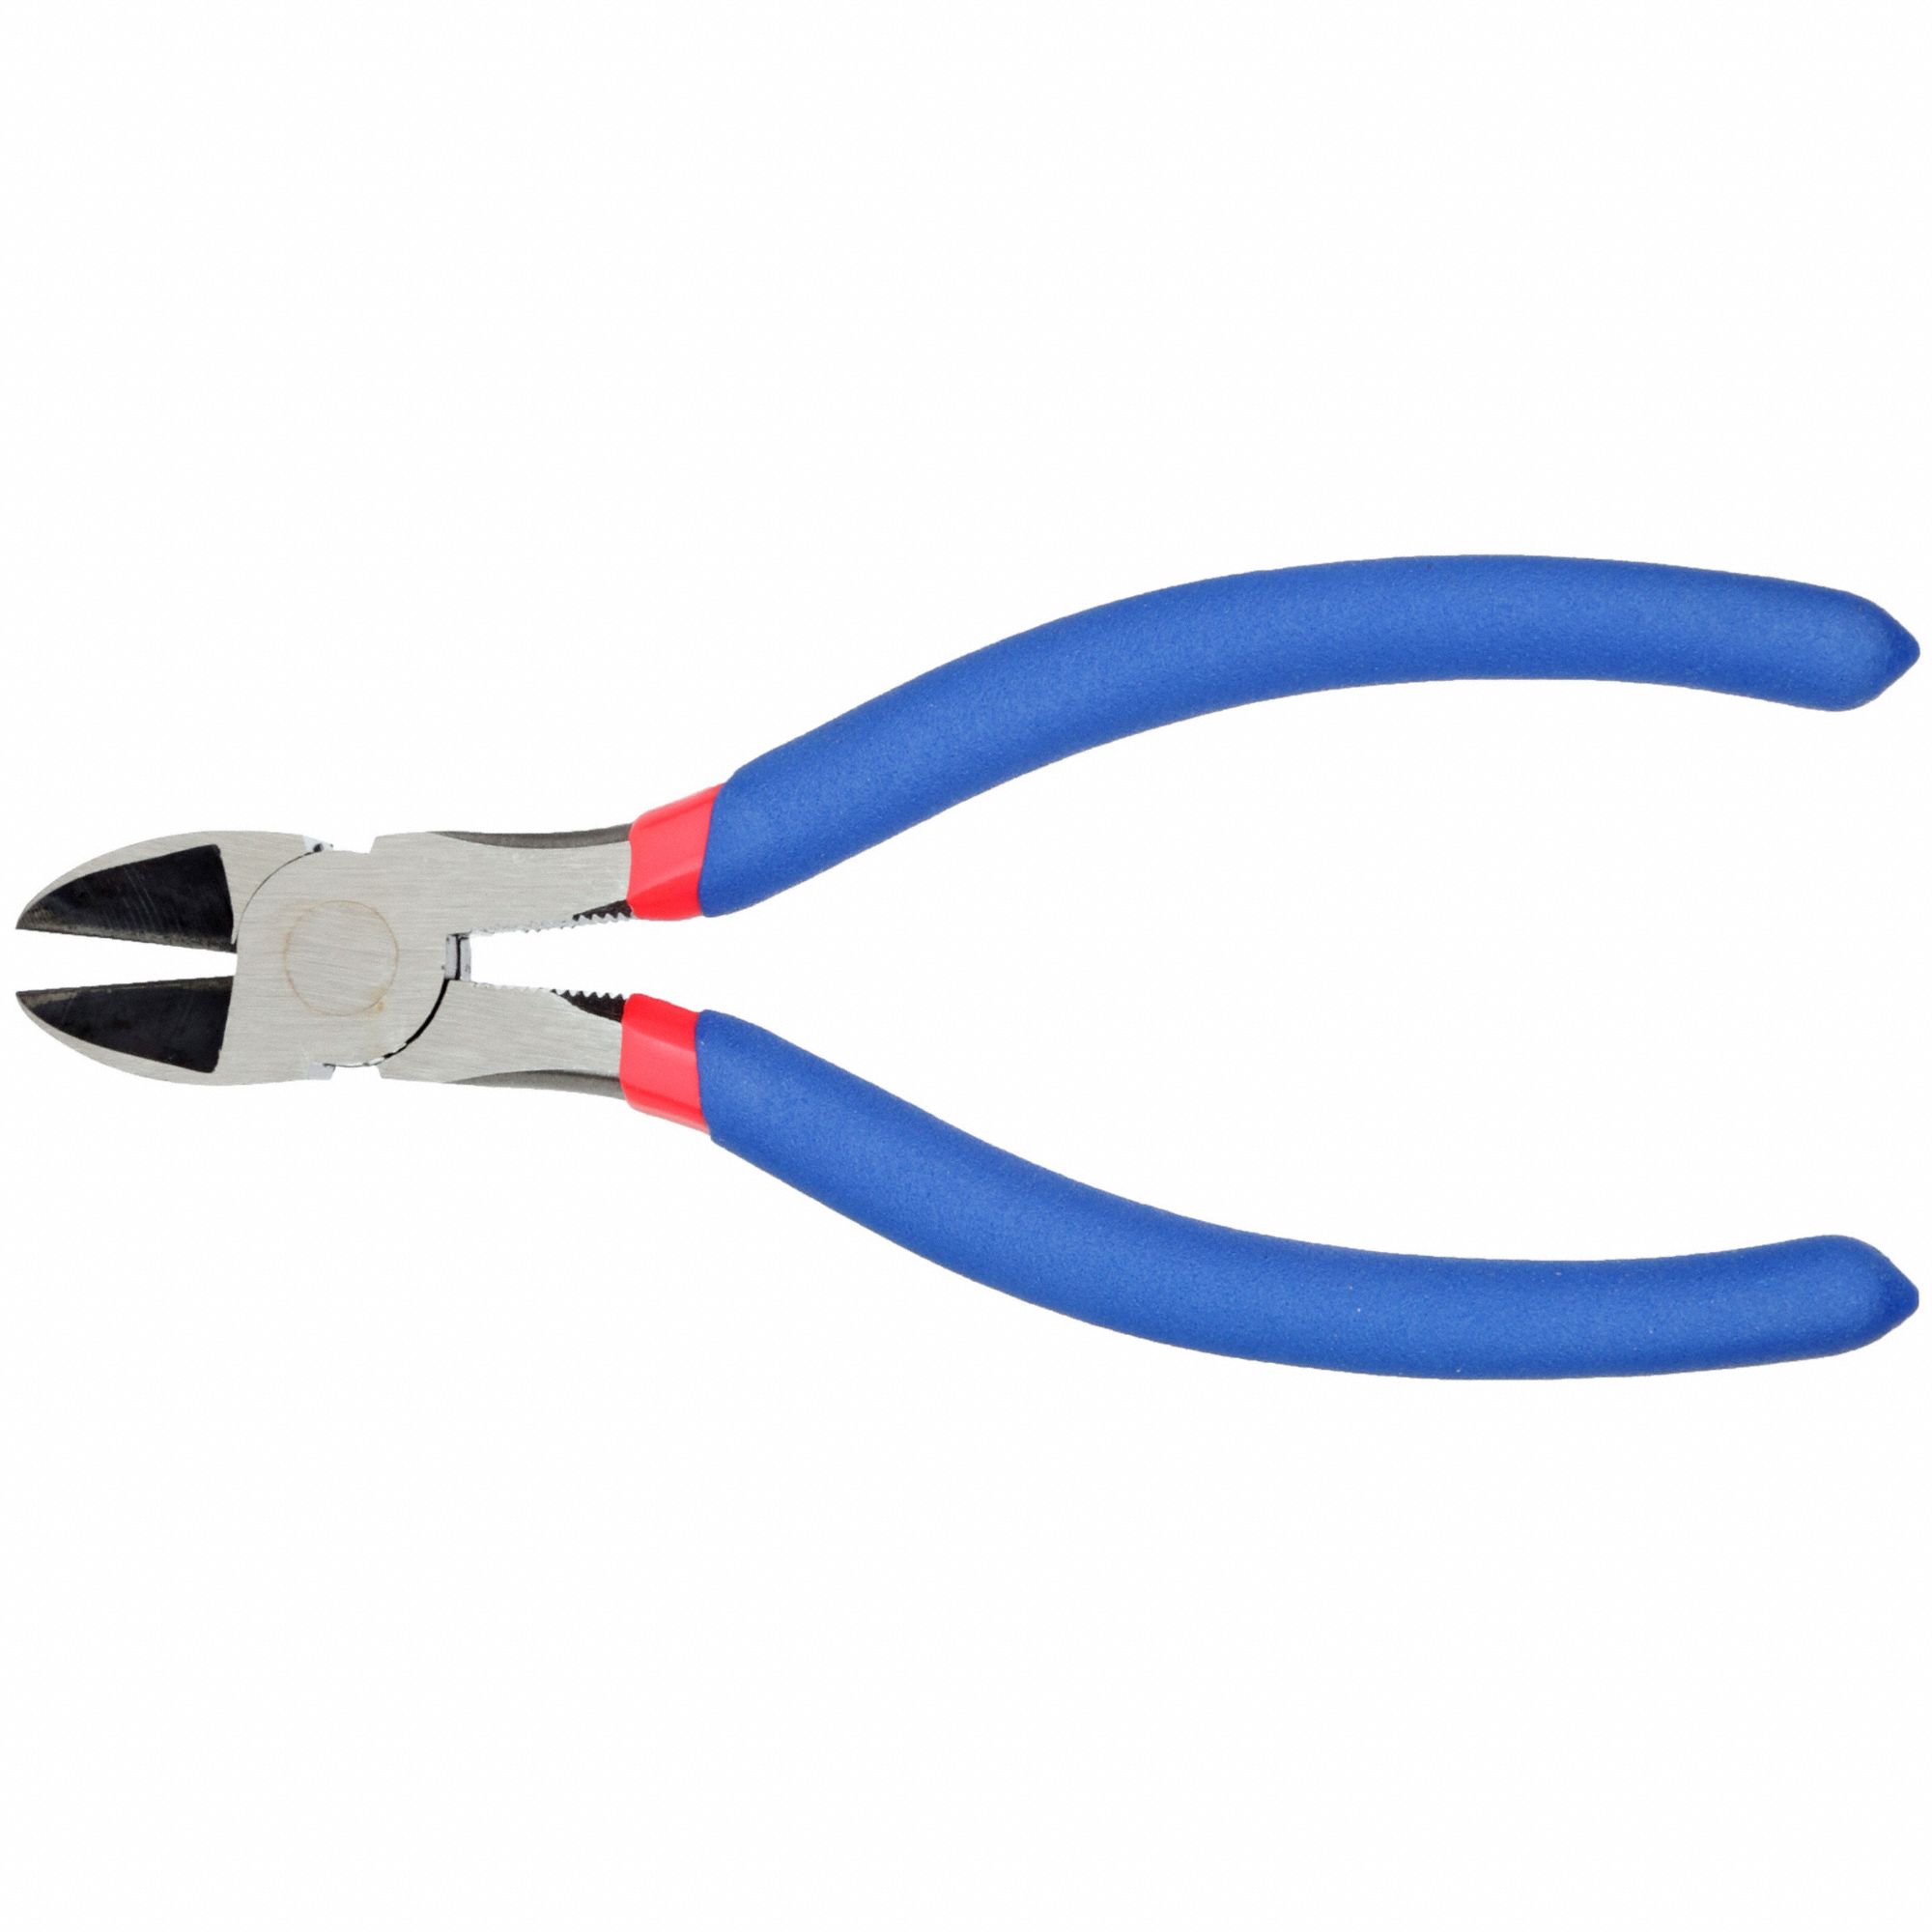 UNIOR 605013 461/14VDE INDULATED DIAGONAL CUTTING PLIERS 160MM qty 1